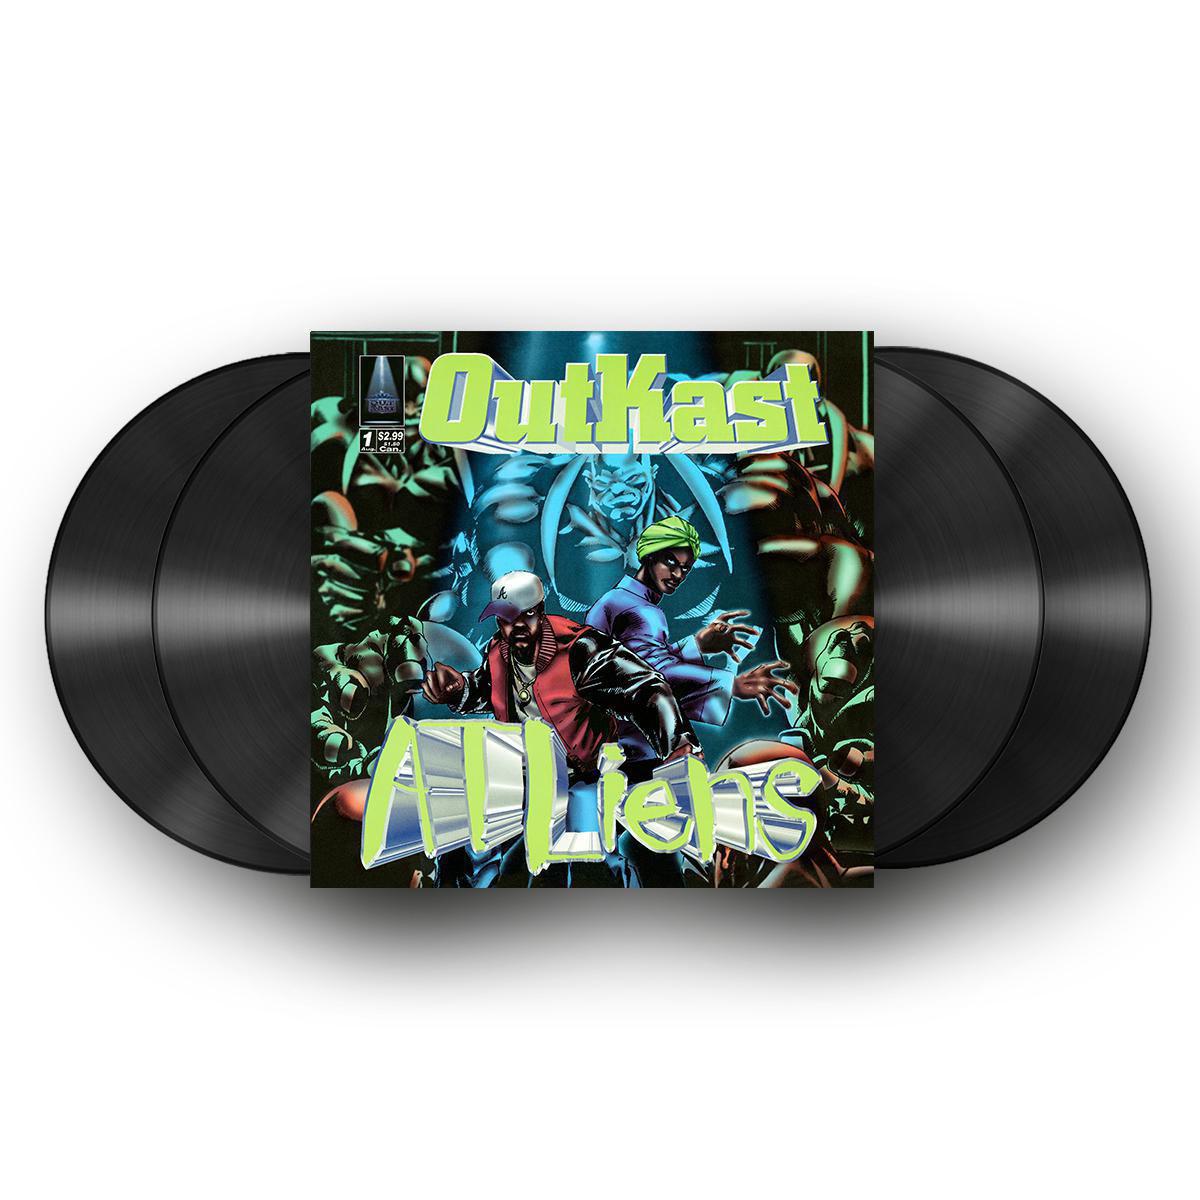 ATLiens - Outkast - (25th (Vinyl) Edition) Deluxe Anniversary